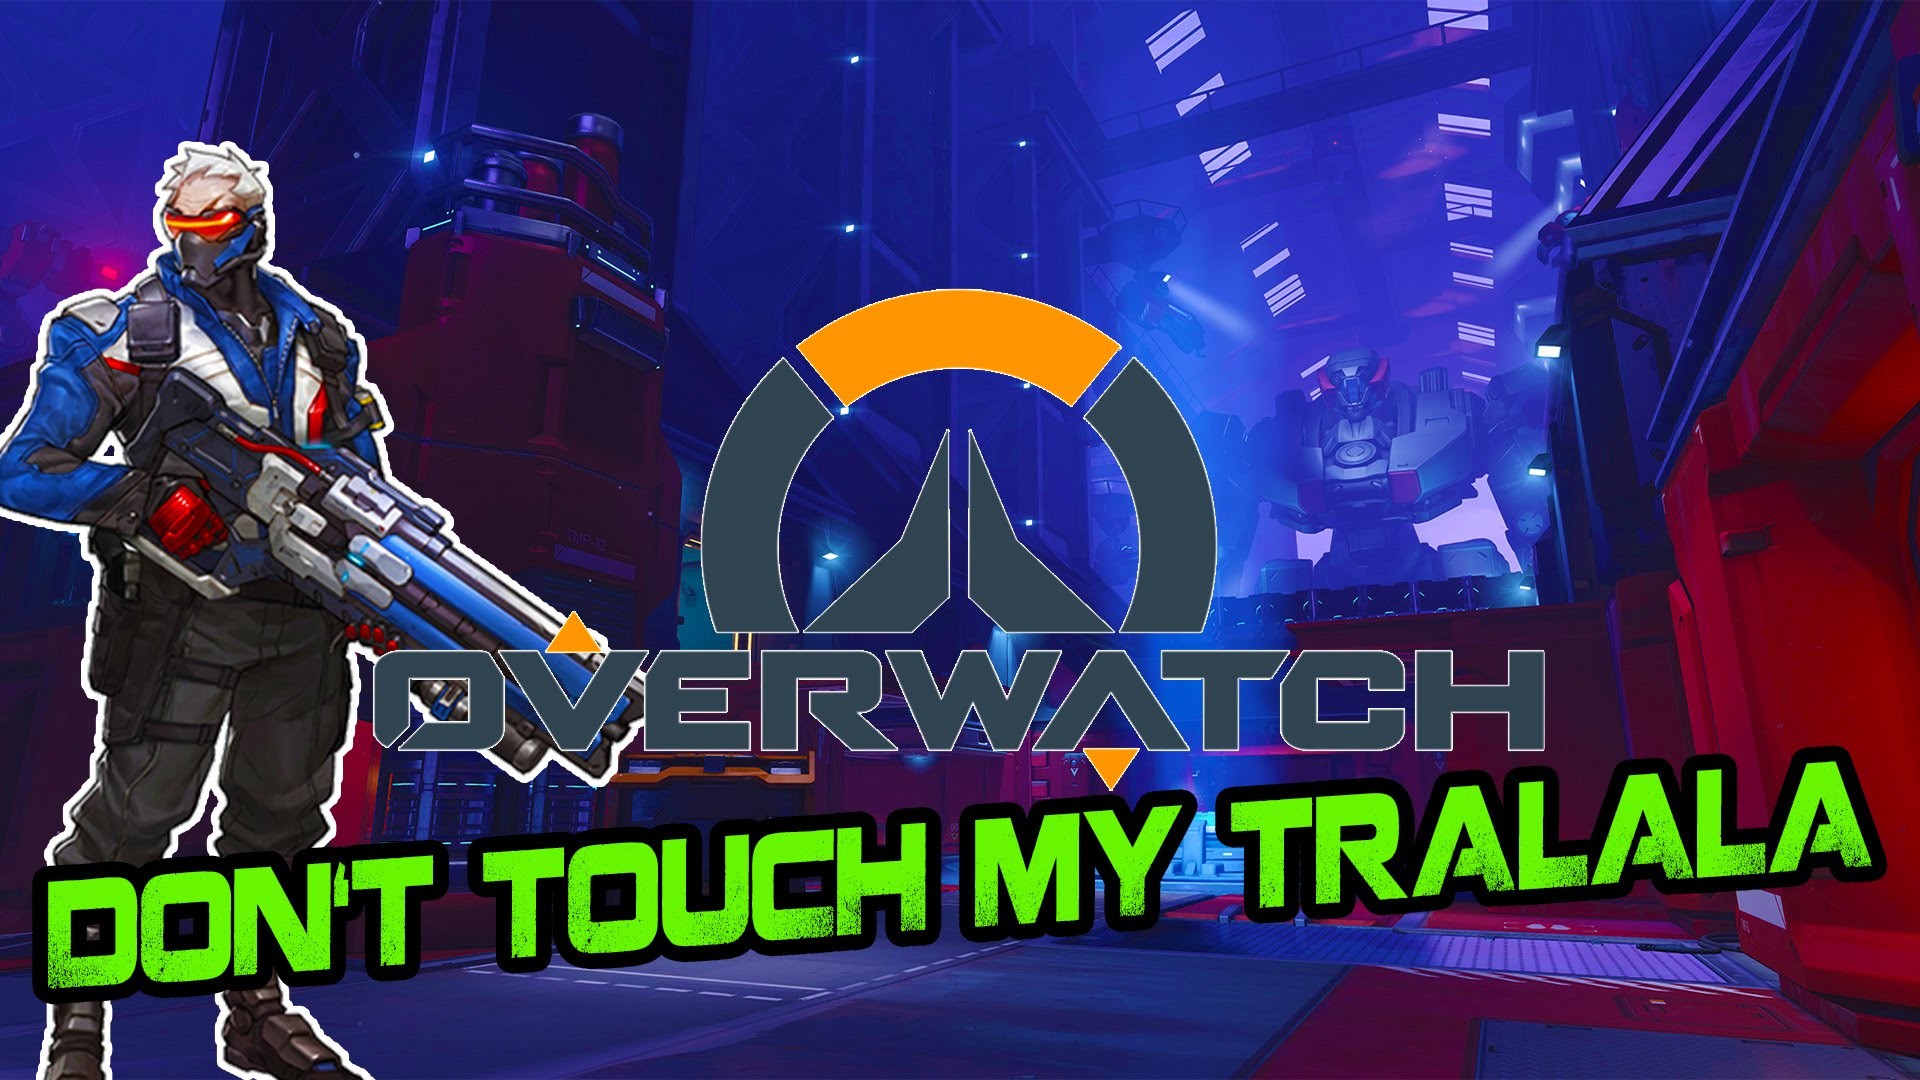 DONT TOUCH MY TRALALA – Lets Play Overwatch PC 60FPS PLAY GESTALT SHUFFLERZ